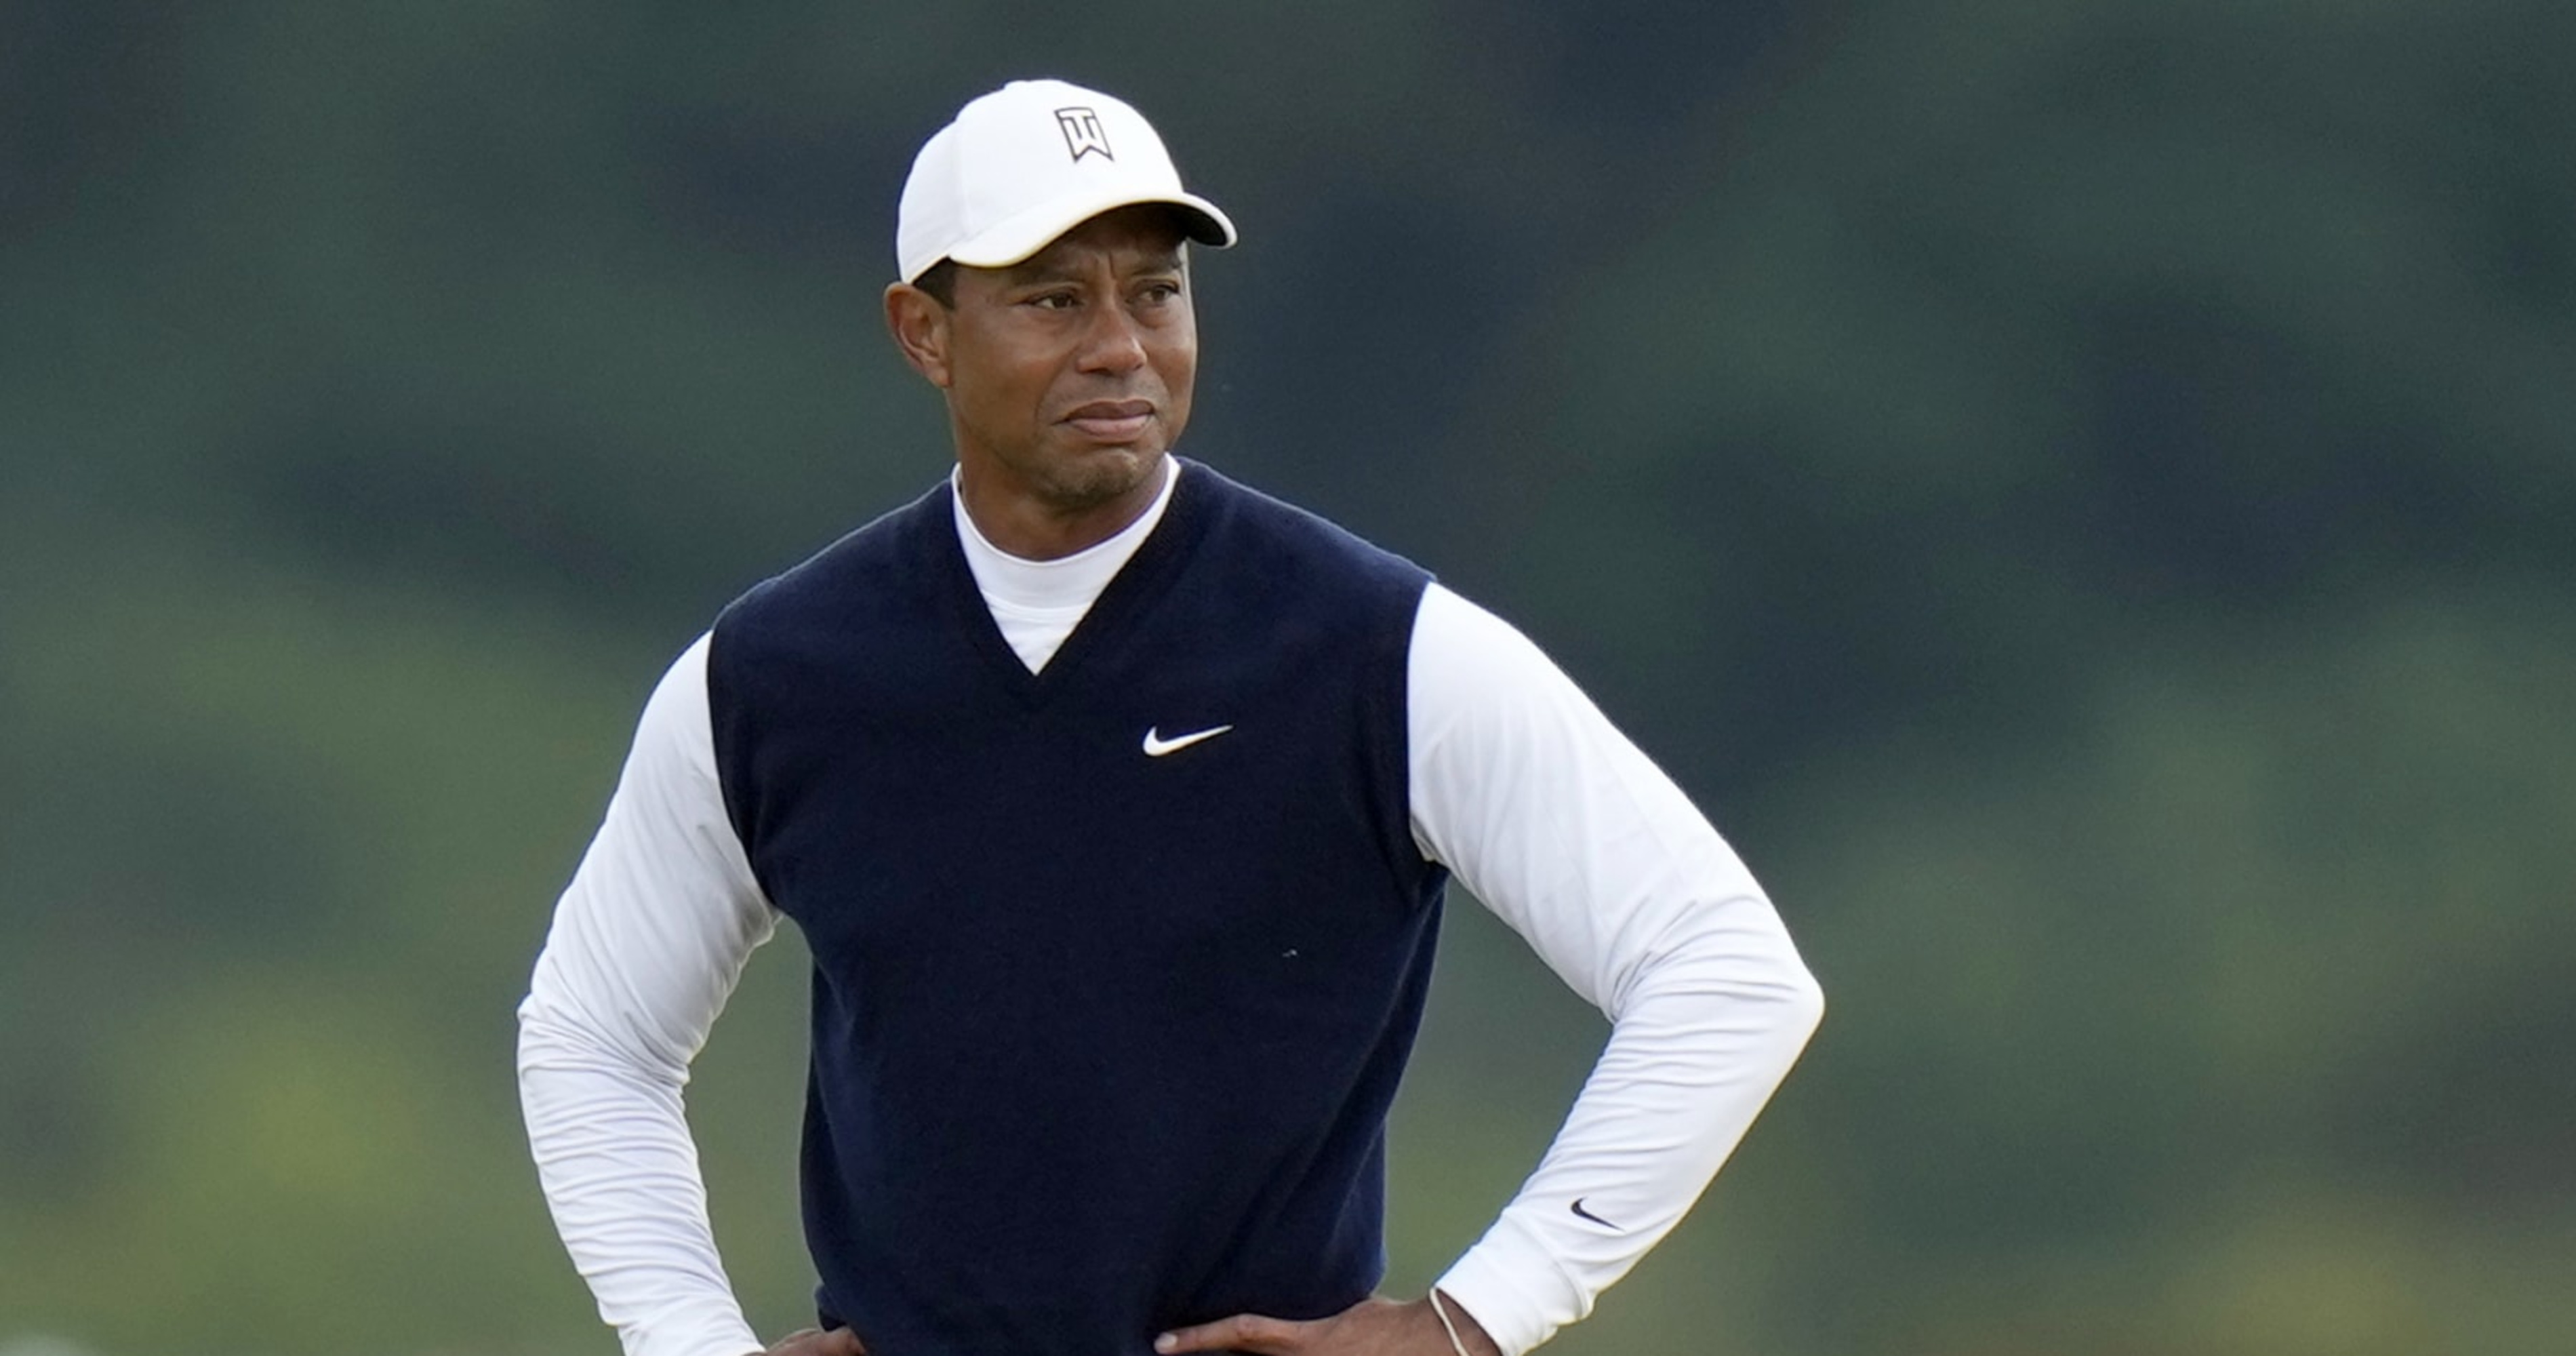 Report: Tiger Woods, Top PGA Players Discussed No-Cut Tournaments with $20M Purs..